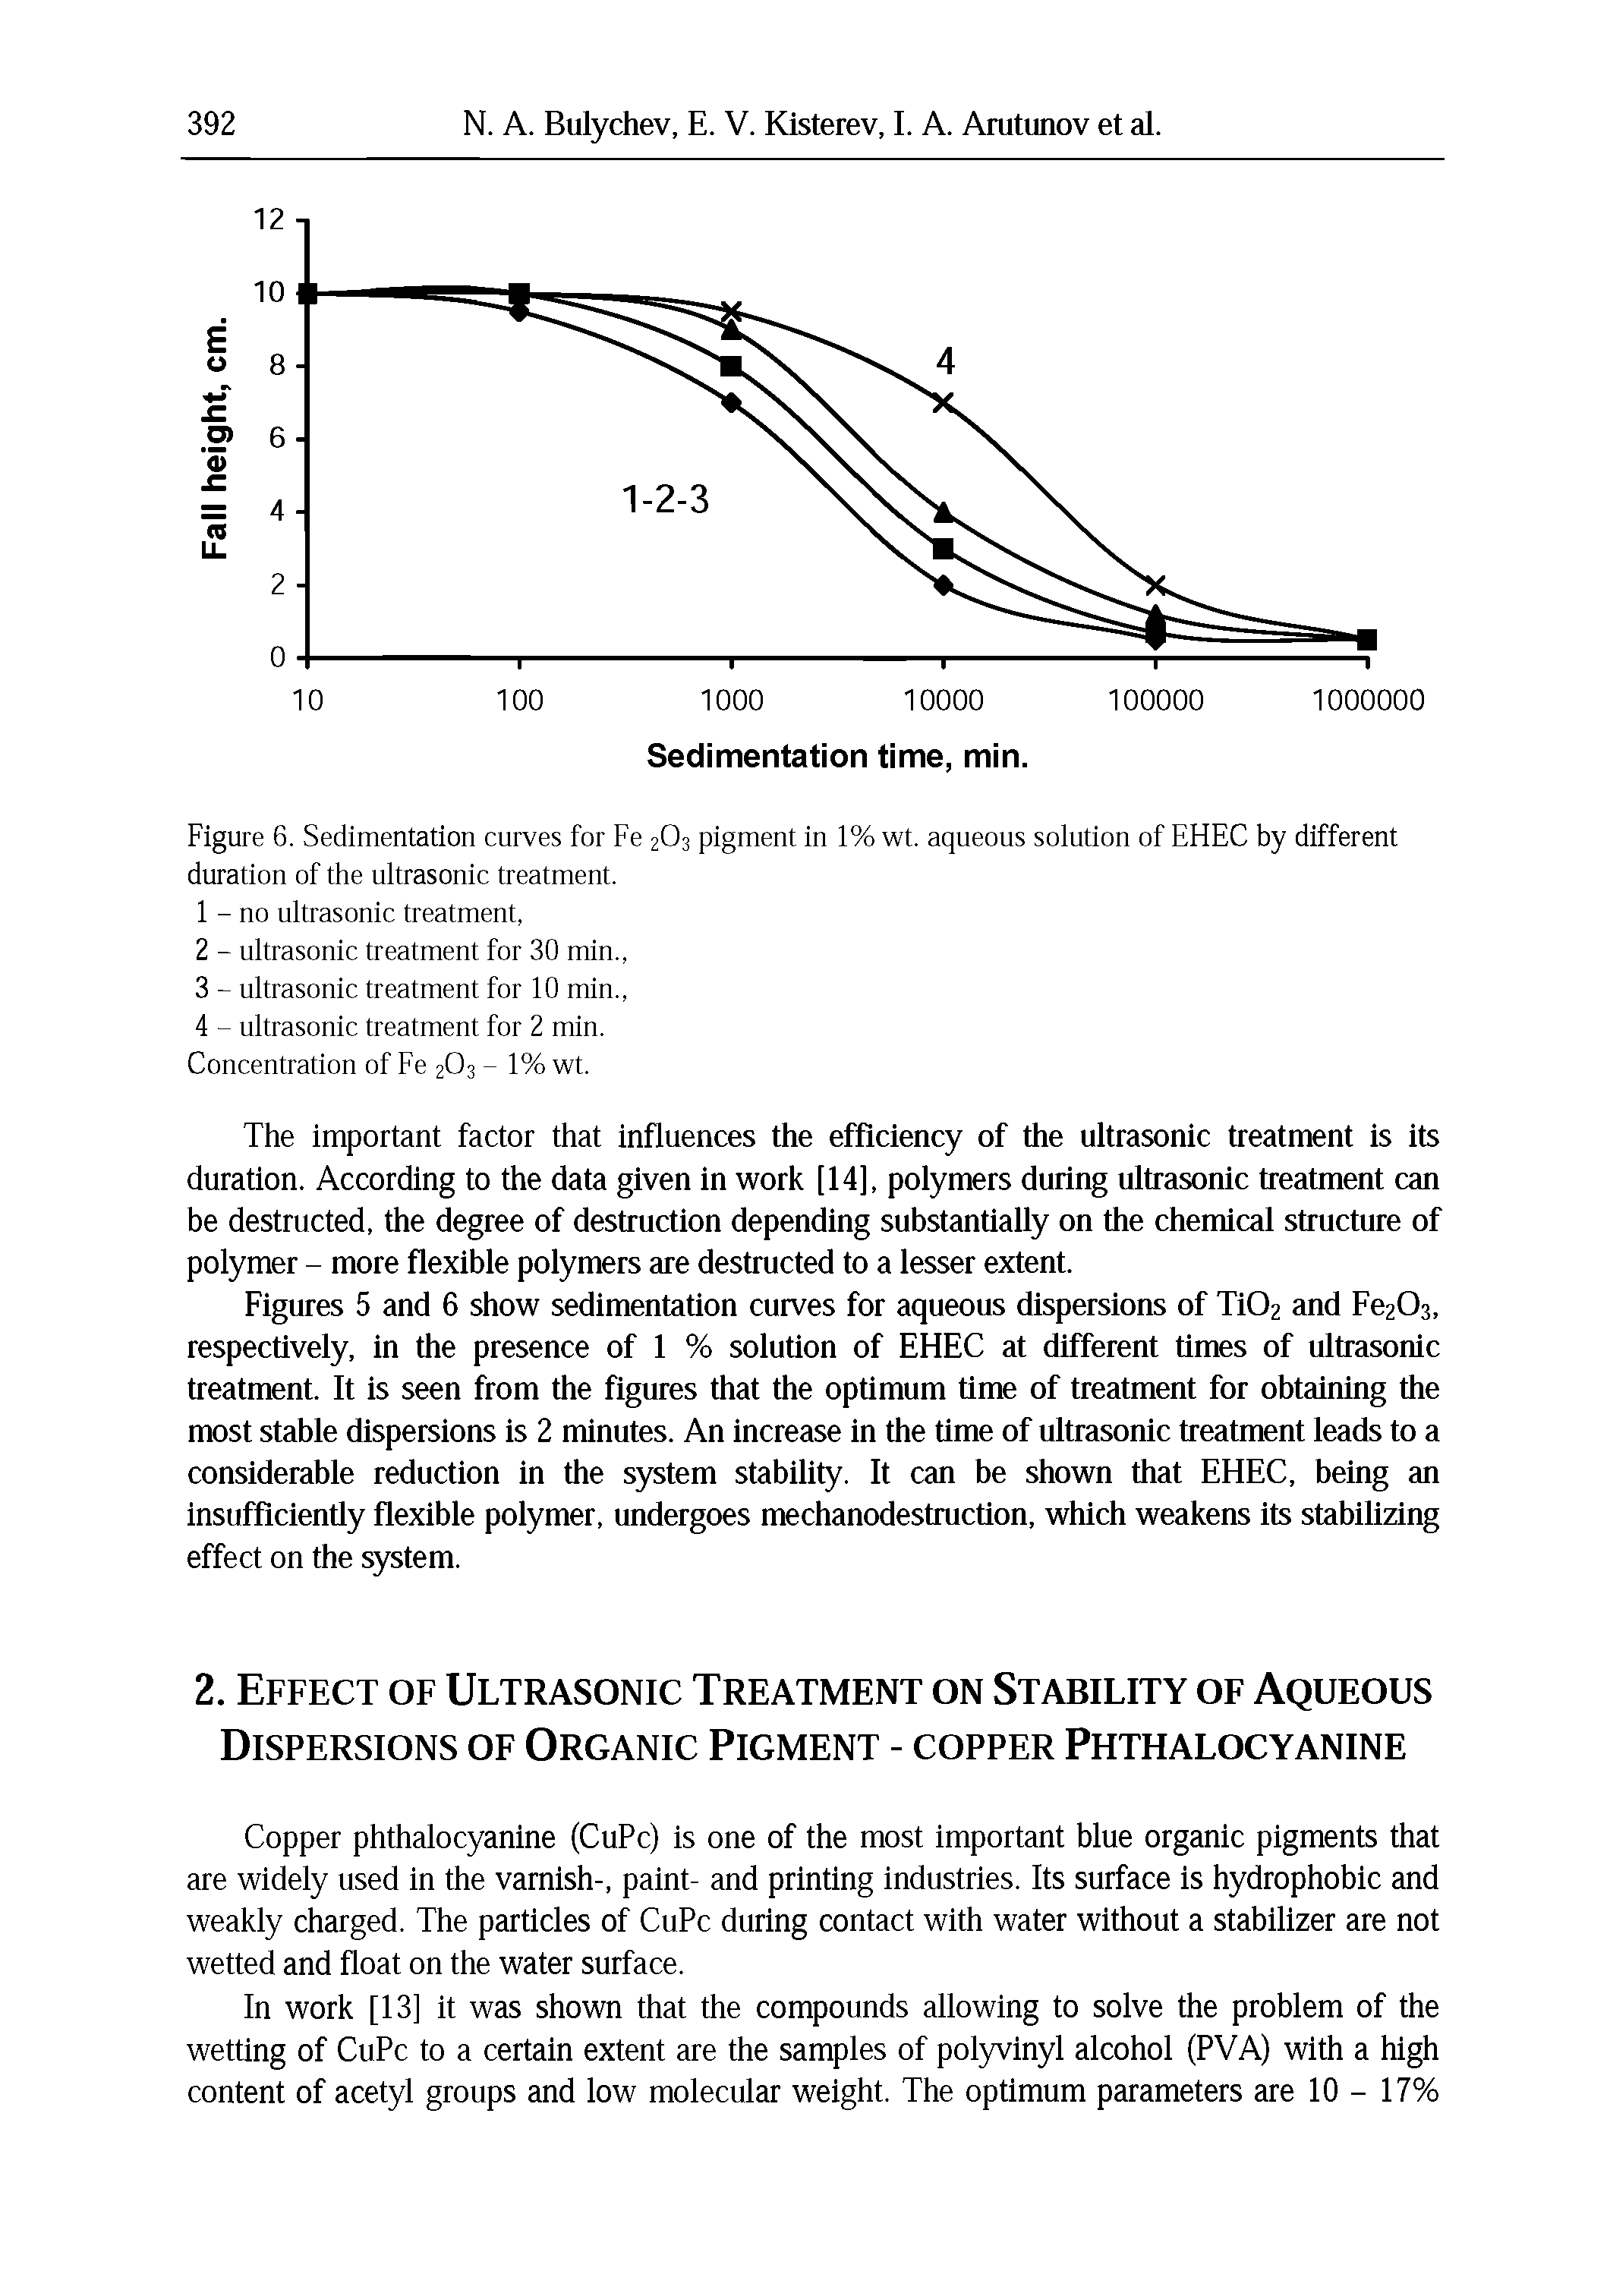 Figures 5 and 6 show sedimentation curves for aqueous dispersions of Ti02 and Fe203, respectively, in the presence of 1 % solution of EHEC at different times of ultrasonic treatment. It is seen from the figures that the optimum time of treatment for obtaining the most stable dispersions is 2 minutes. An increase in the time of ultrasonic treatment leads to a considerable reduction in the system stability. It can be shown that EHEC, being an insufficiently flexible polymer, undergoes mechanodestruction, which weakens its stabilizing effect on the system.